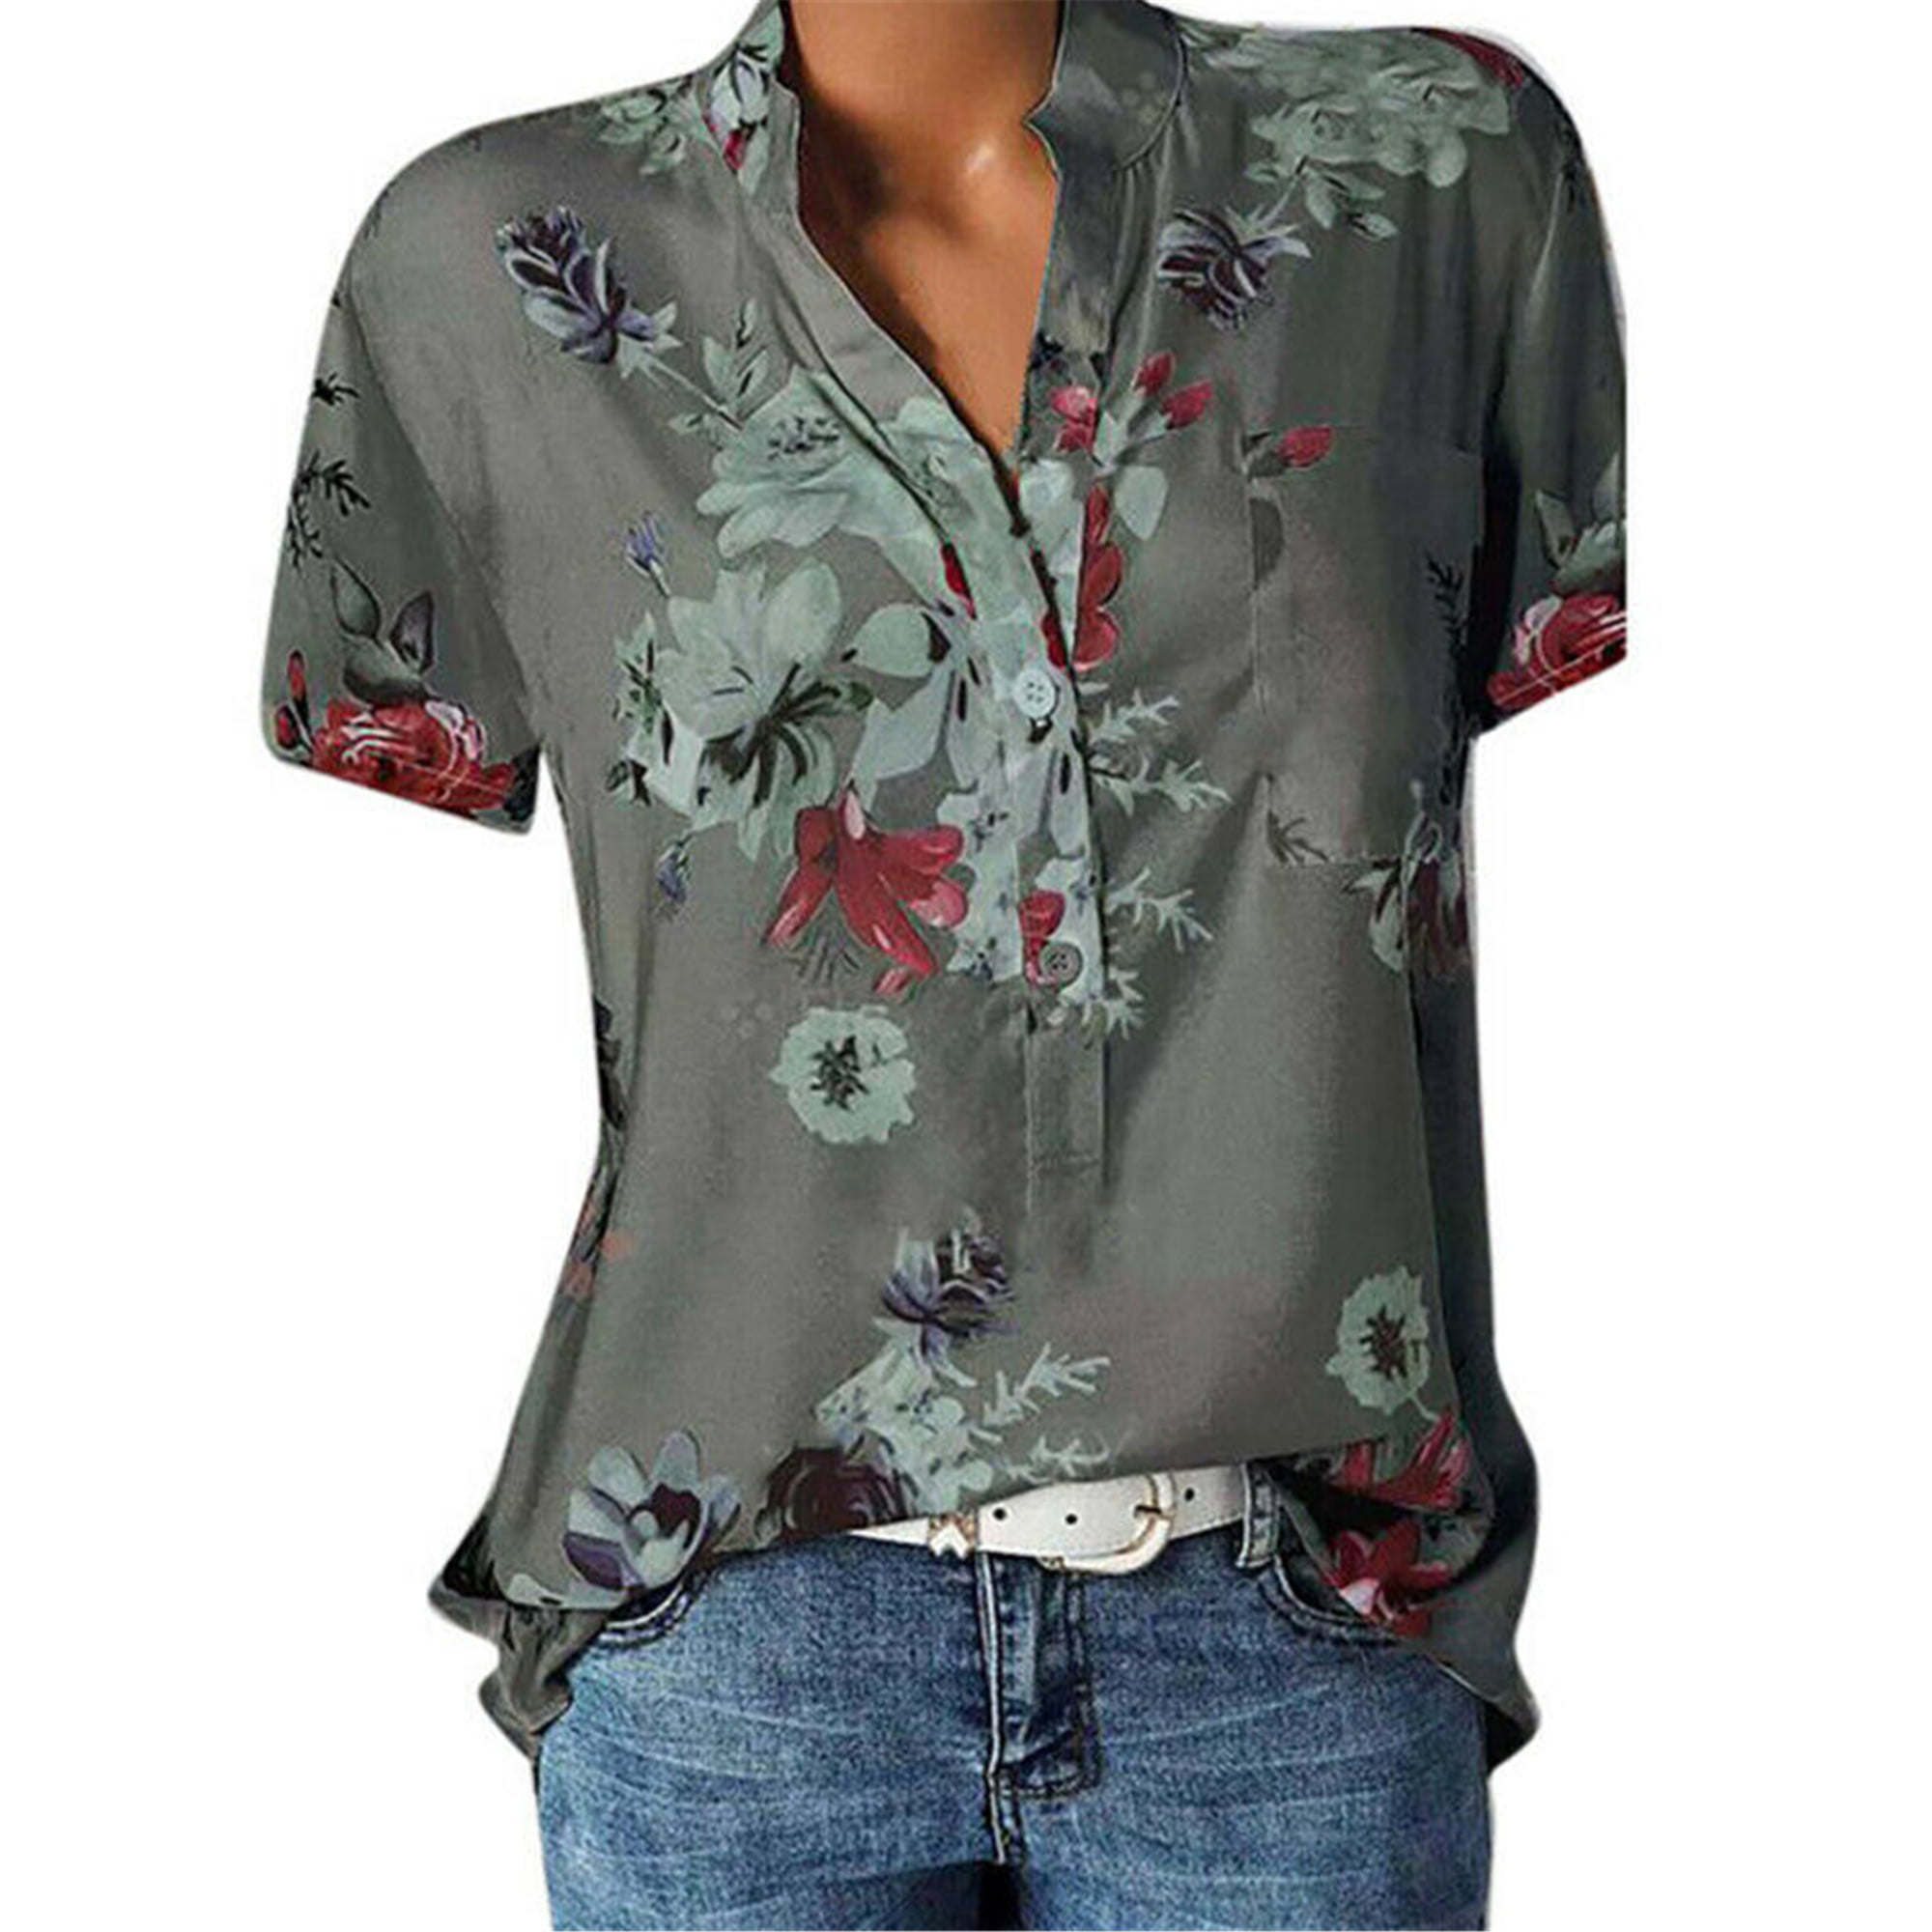 Womens Floral Print Button Shirts Short Sleeve O-Neck Summer Casual Blouse Tops Tshirts Tunic Trendy Dressy